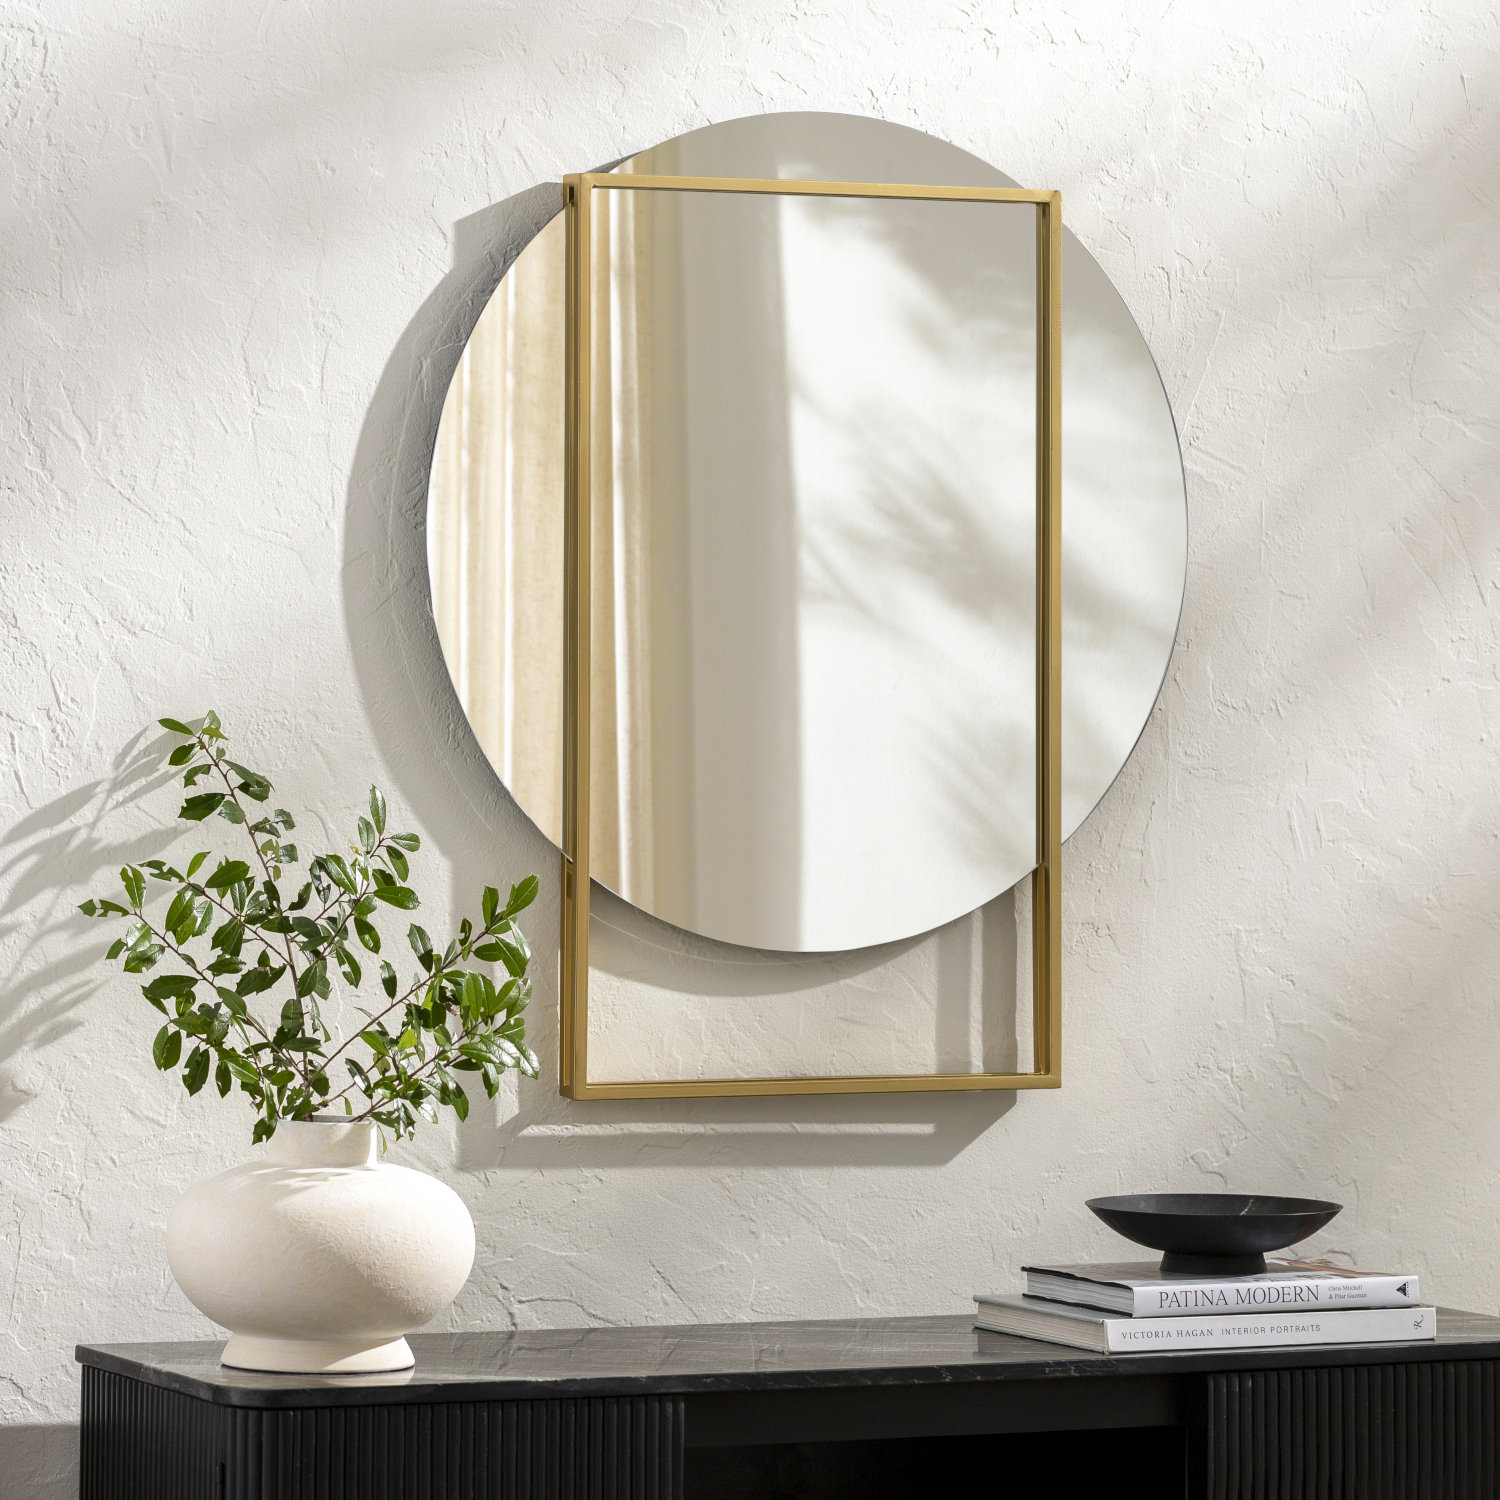 Niculaie Accent Mirror Everly Quinn Size: 35 x 30